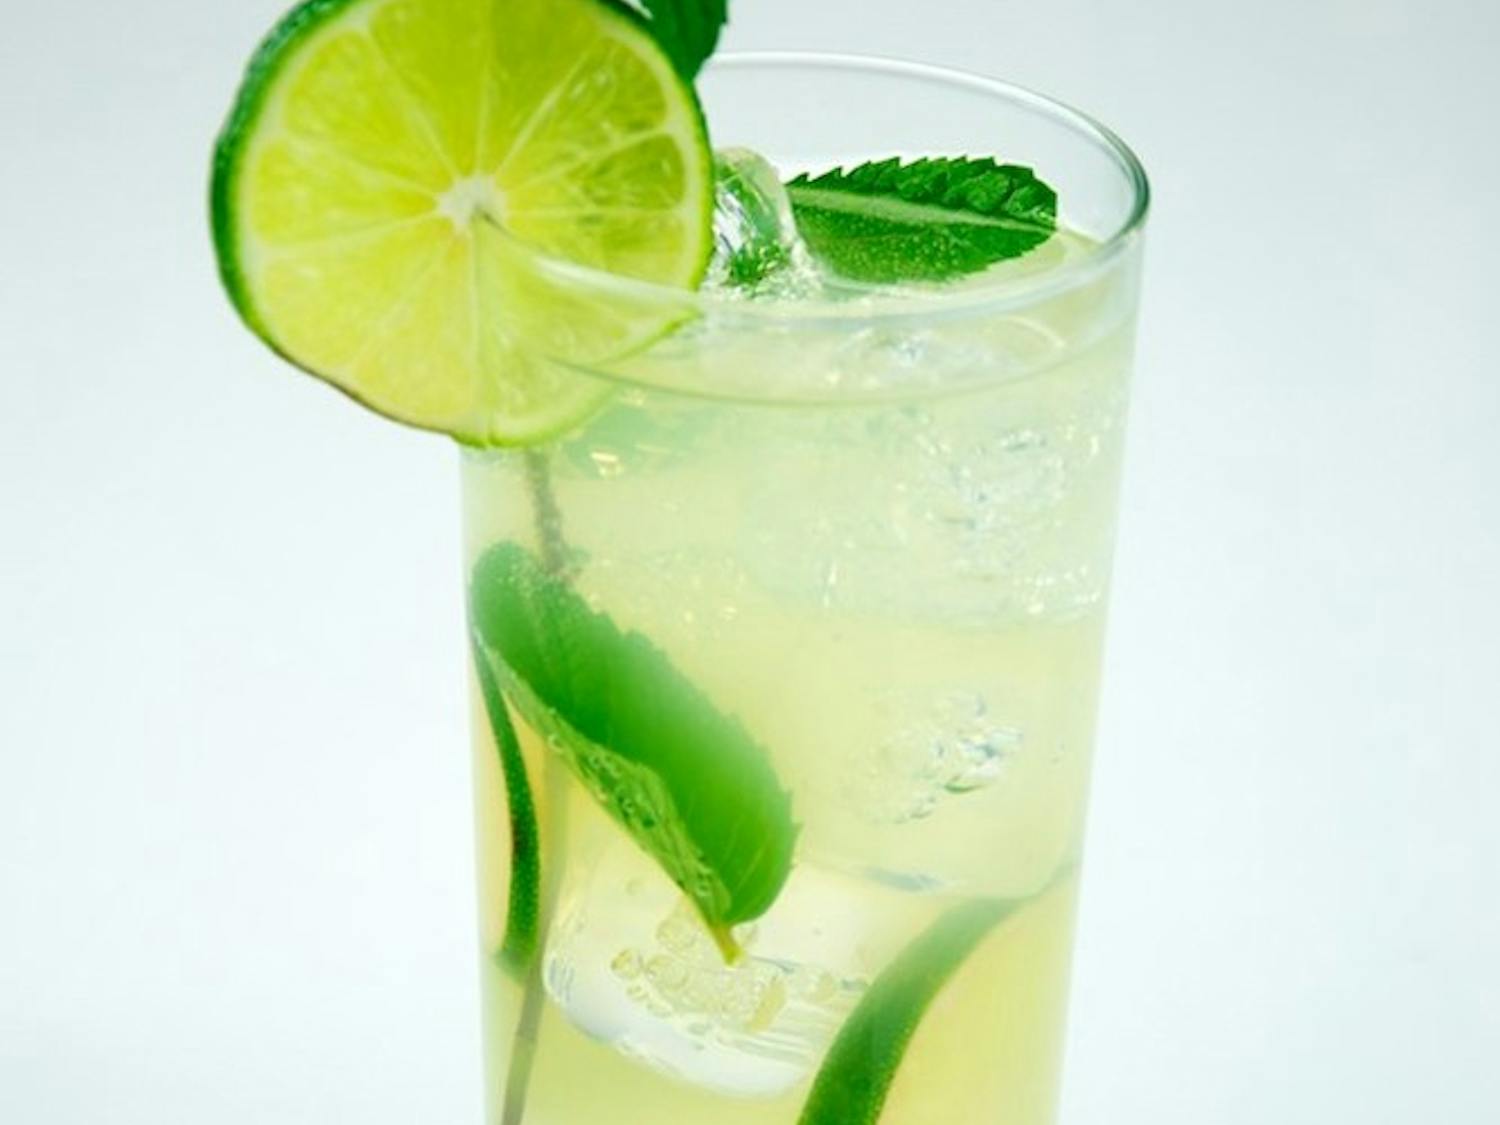 A mojito is a great cocktail to enjoy while sitting by the beach or pool.